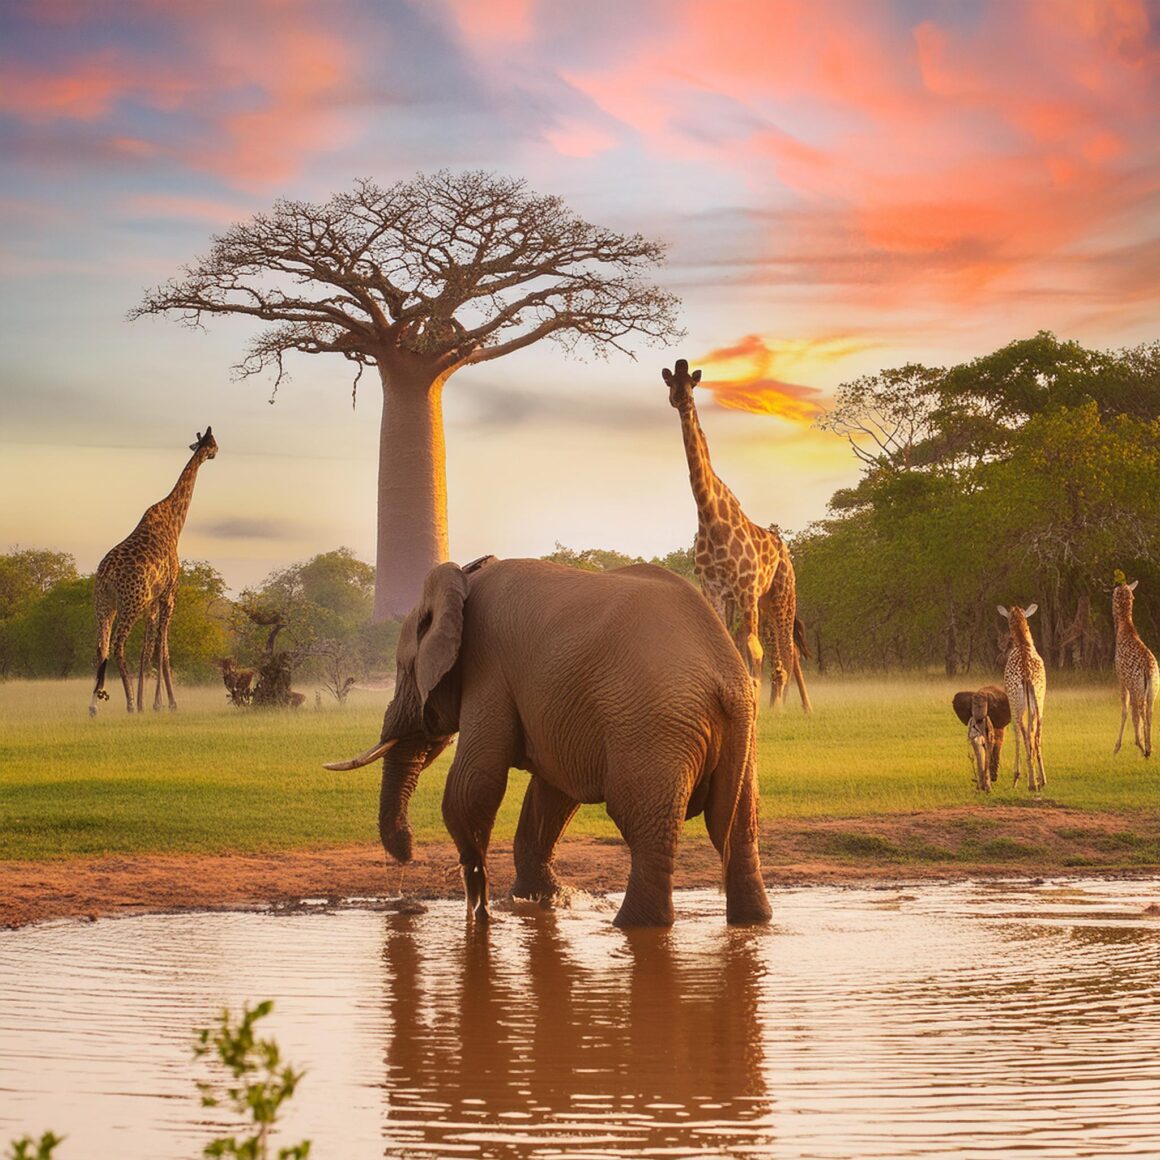 Style Reference original image amazonian forest elephant drinking water with giraffes